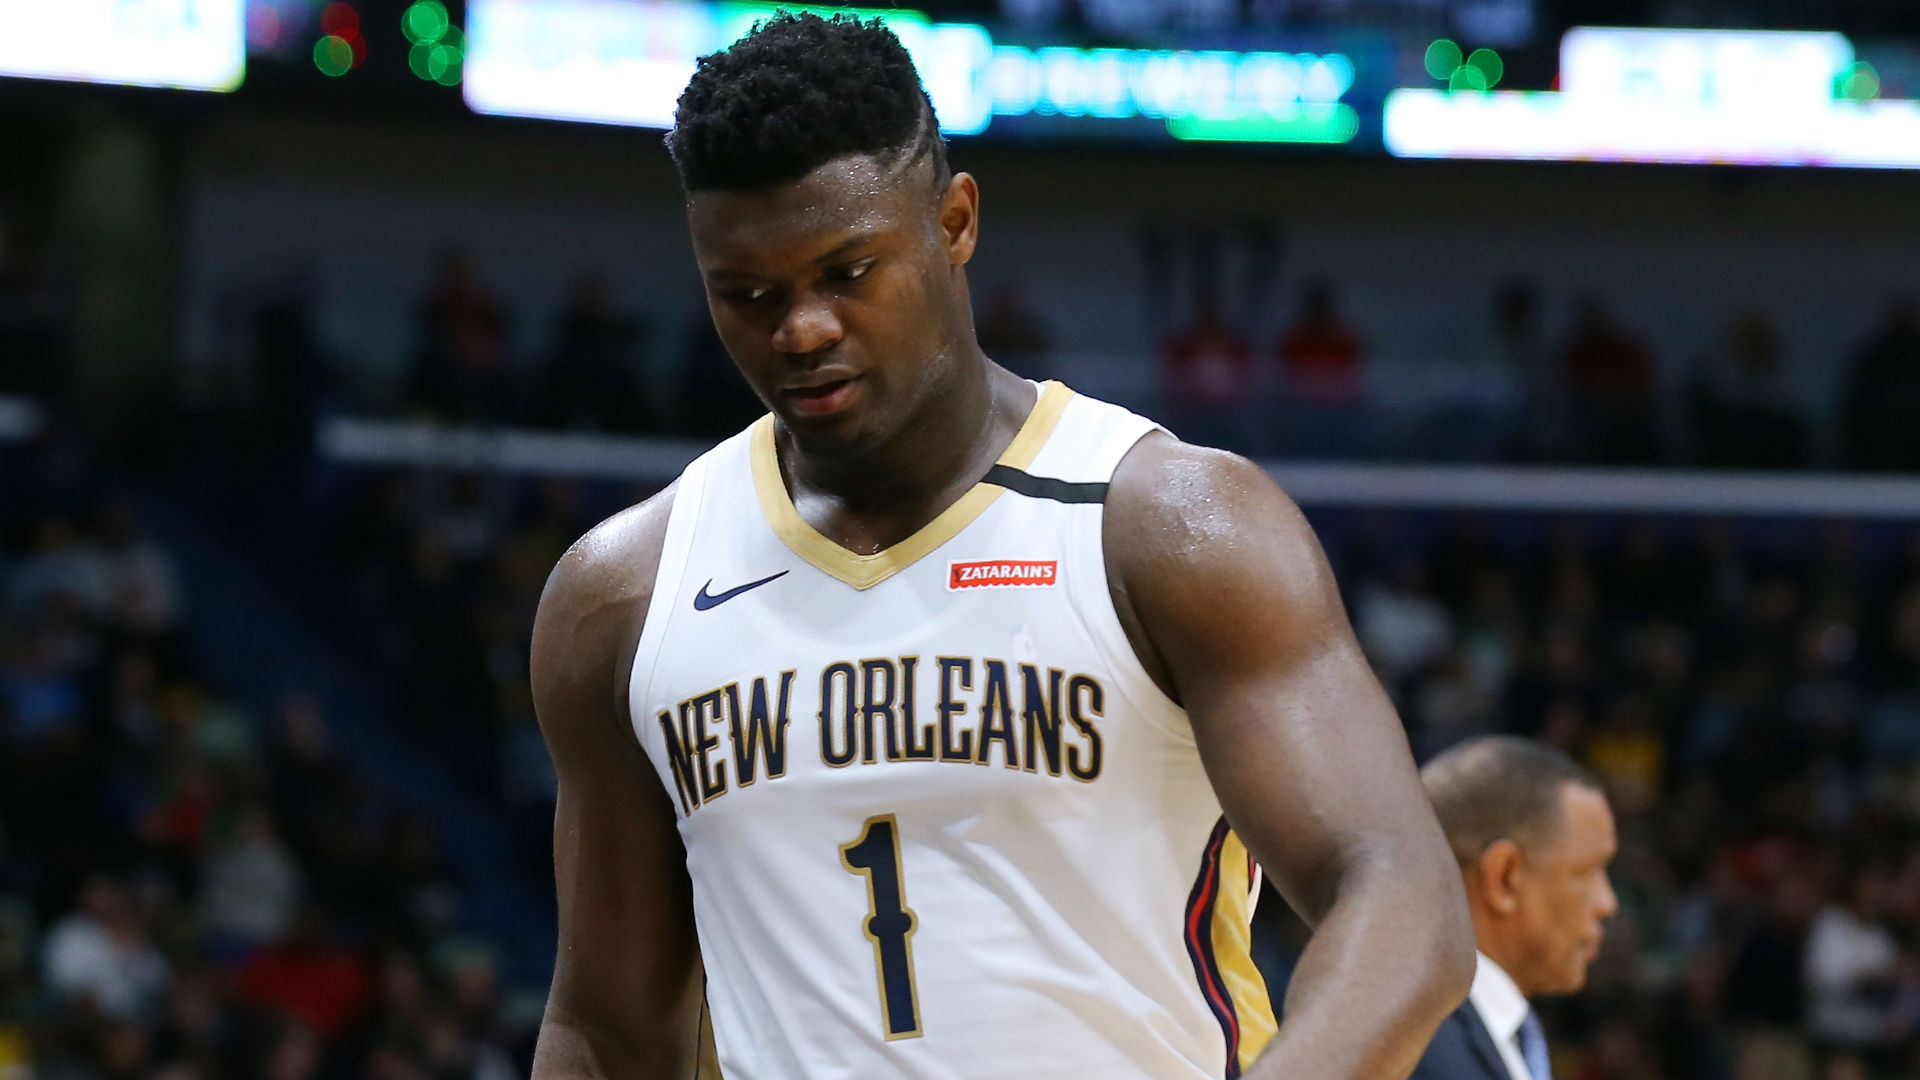 A spot in the NBA playoffs with the New Orleans Pelicans is more important than the Rookie of the Year award for Zion Williamson.